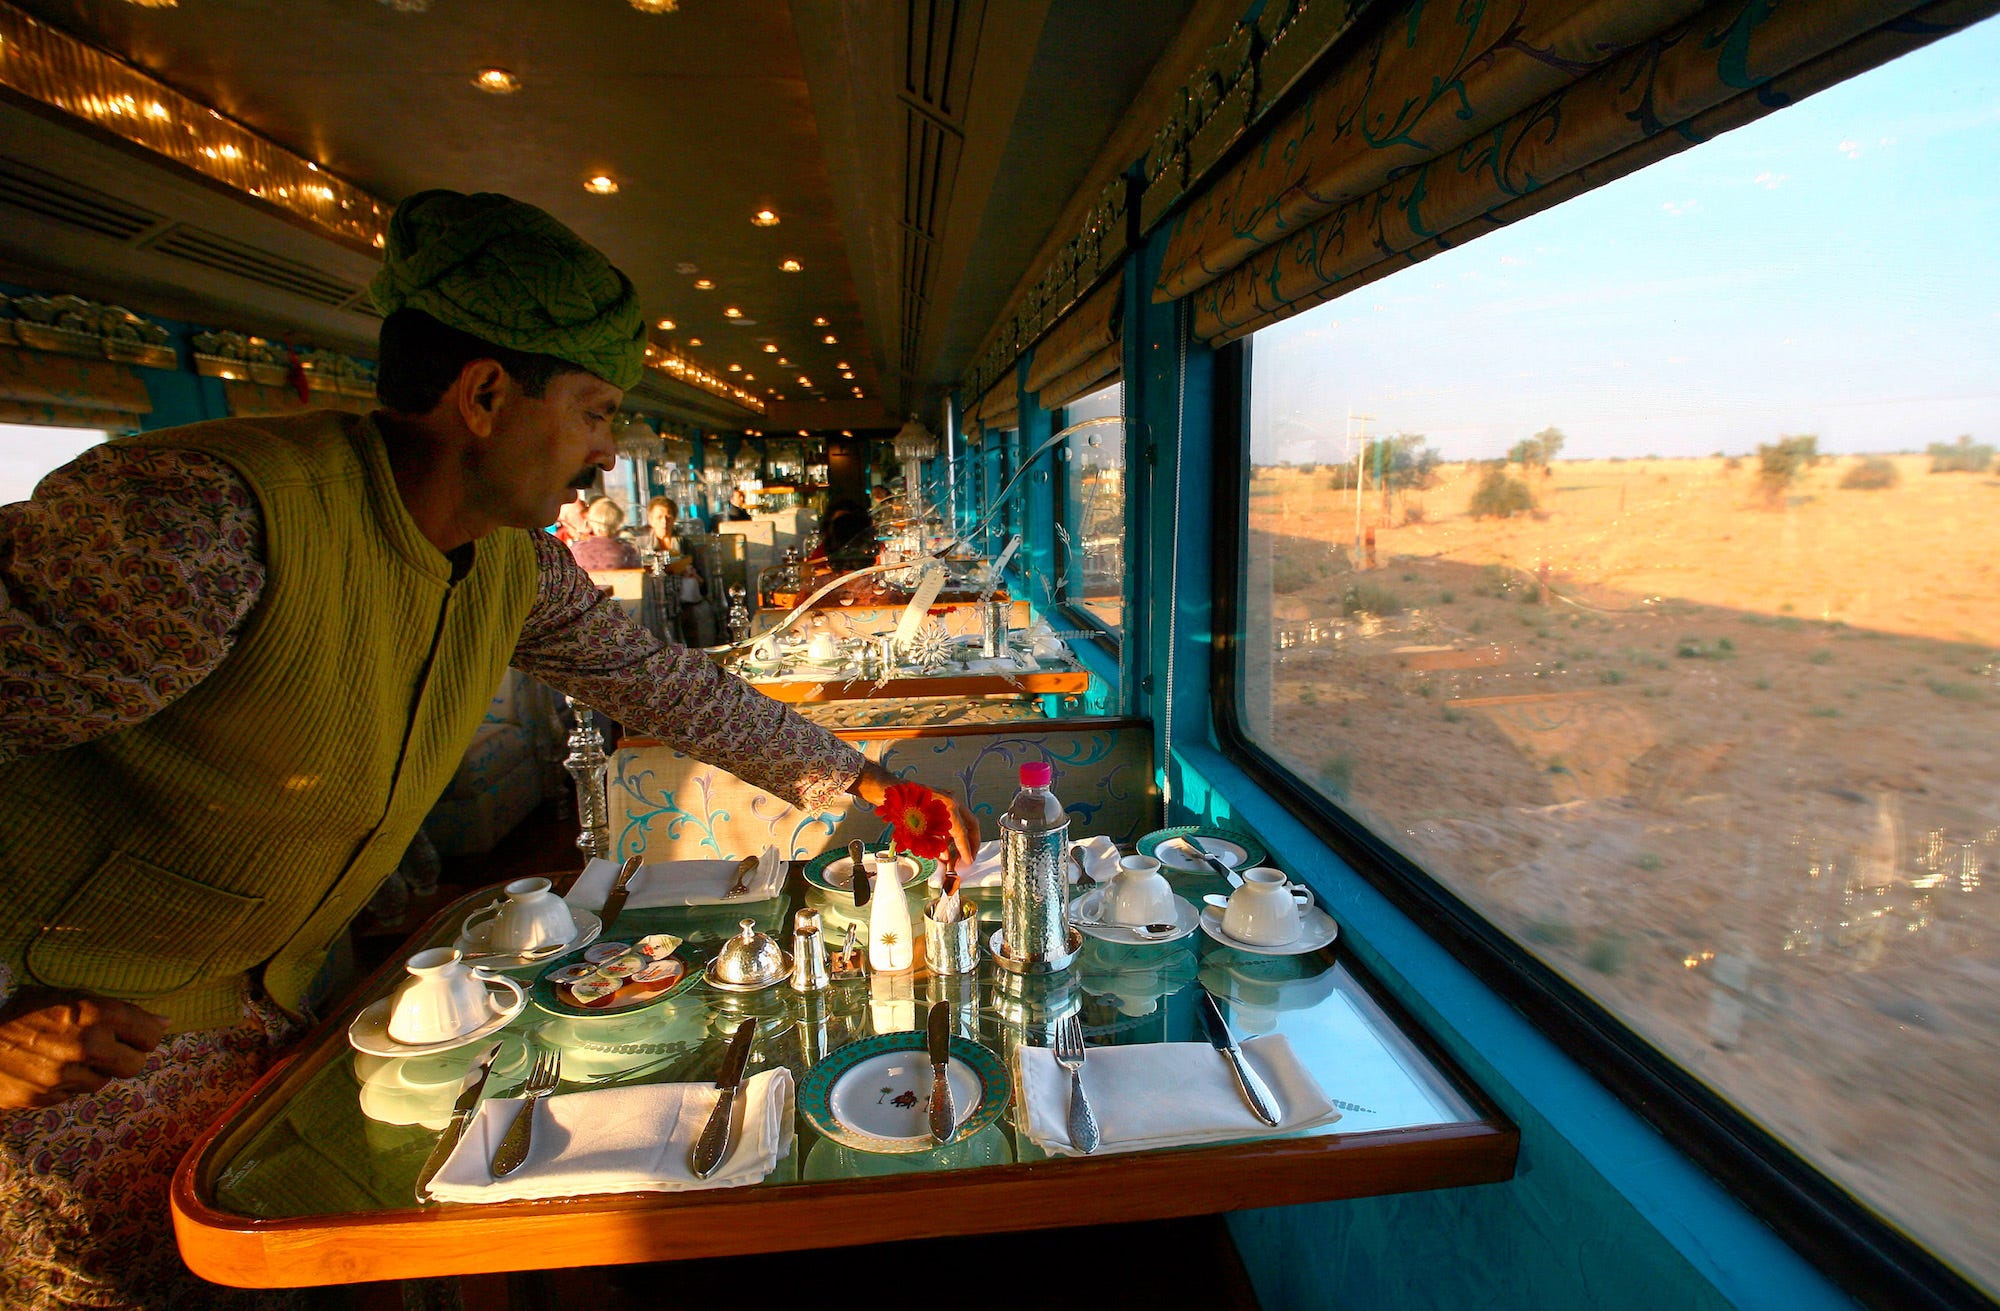 <p><strong>Country</strong>: India</p><p><strong>Duration of trip</strong>: 7 nights, 8 days</p><p><strong>Description: </strong>Palace on Wheels is a luxury resort aboard a train — complete with a spa — that takes riders past India's temples, forts, and Taj Mahal on a seven-night passage.</p><p><strong>Cost:</strong> Between $665 and $2,391 per night</p><p><em>Source: <a href="https://www.palacesonwheels.com/the-train.html" rel="noopener">Palace on Wheels</a></em></p>